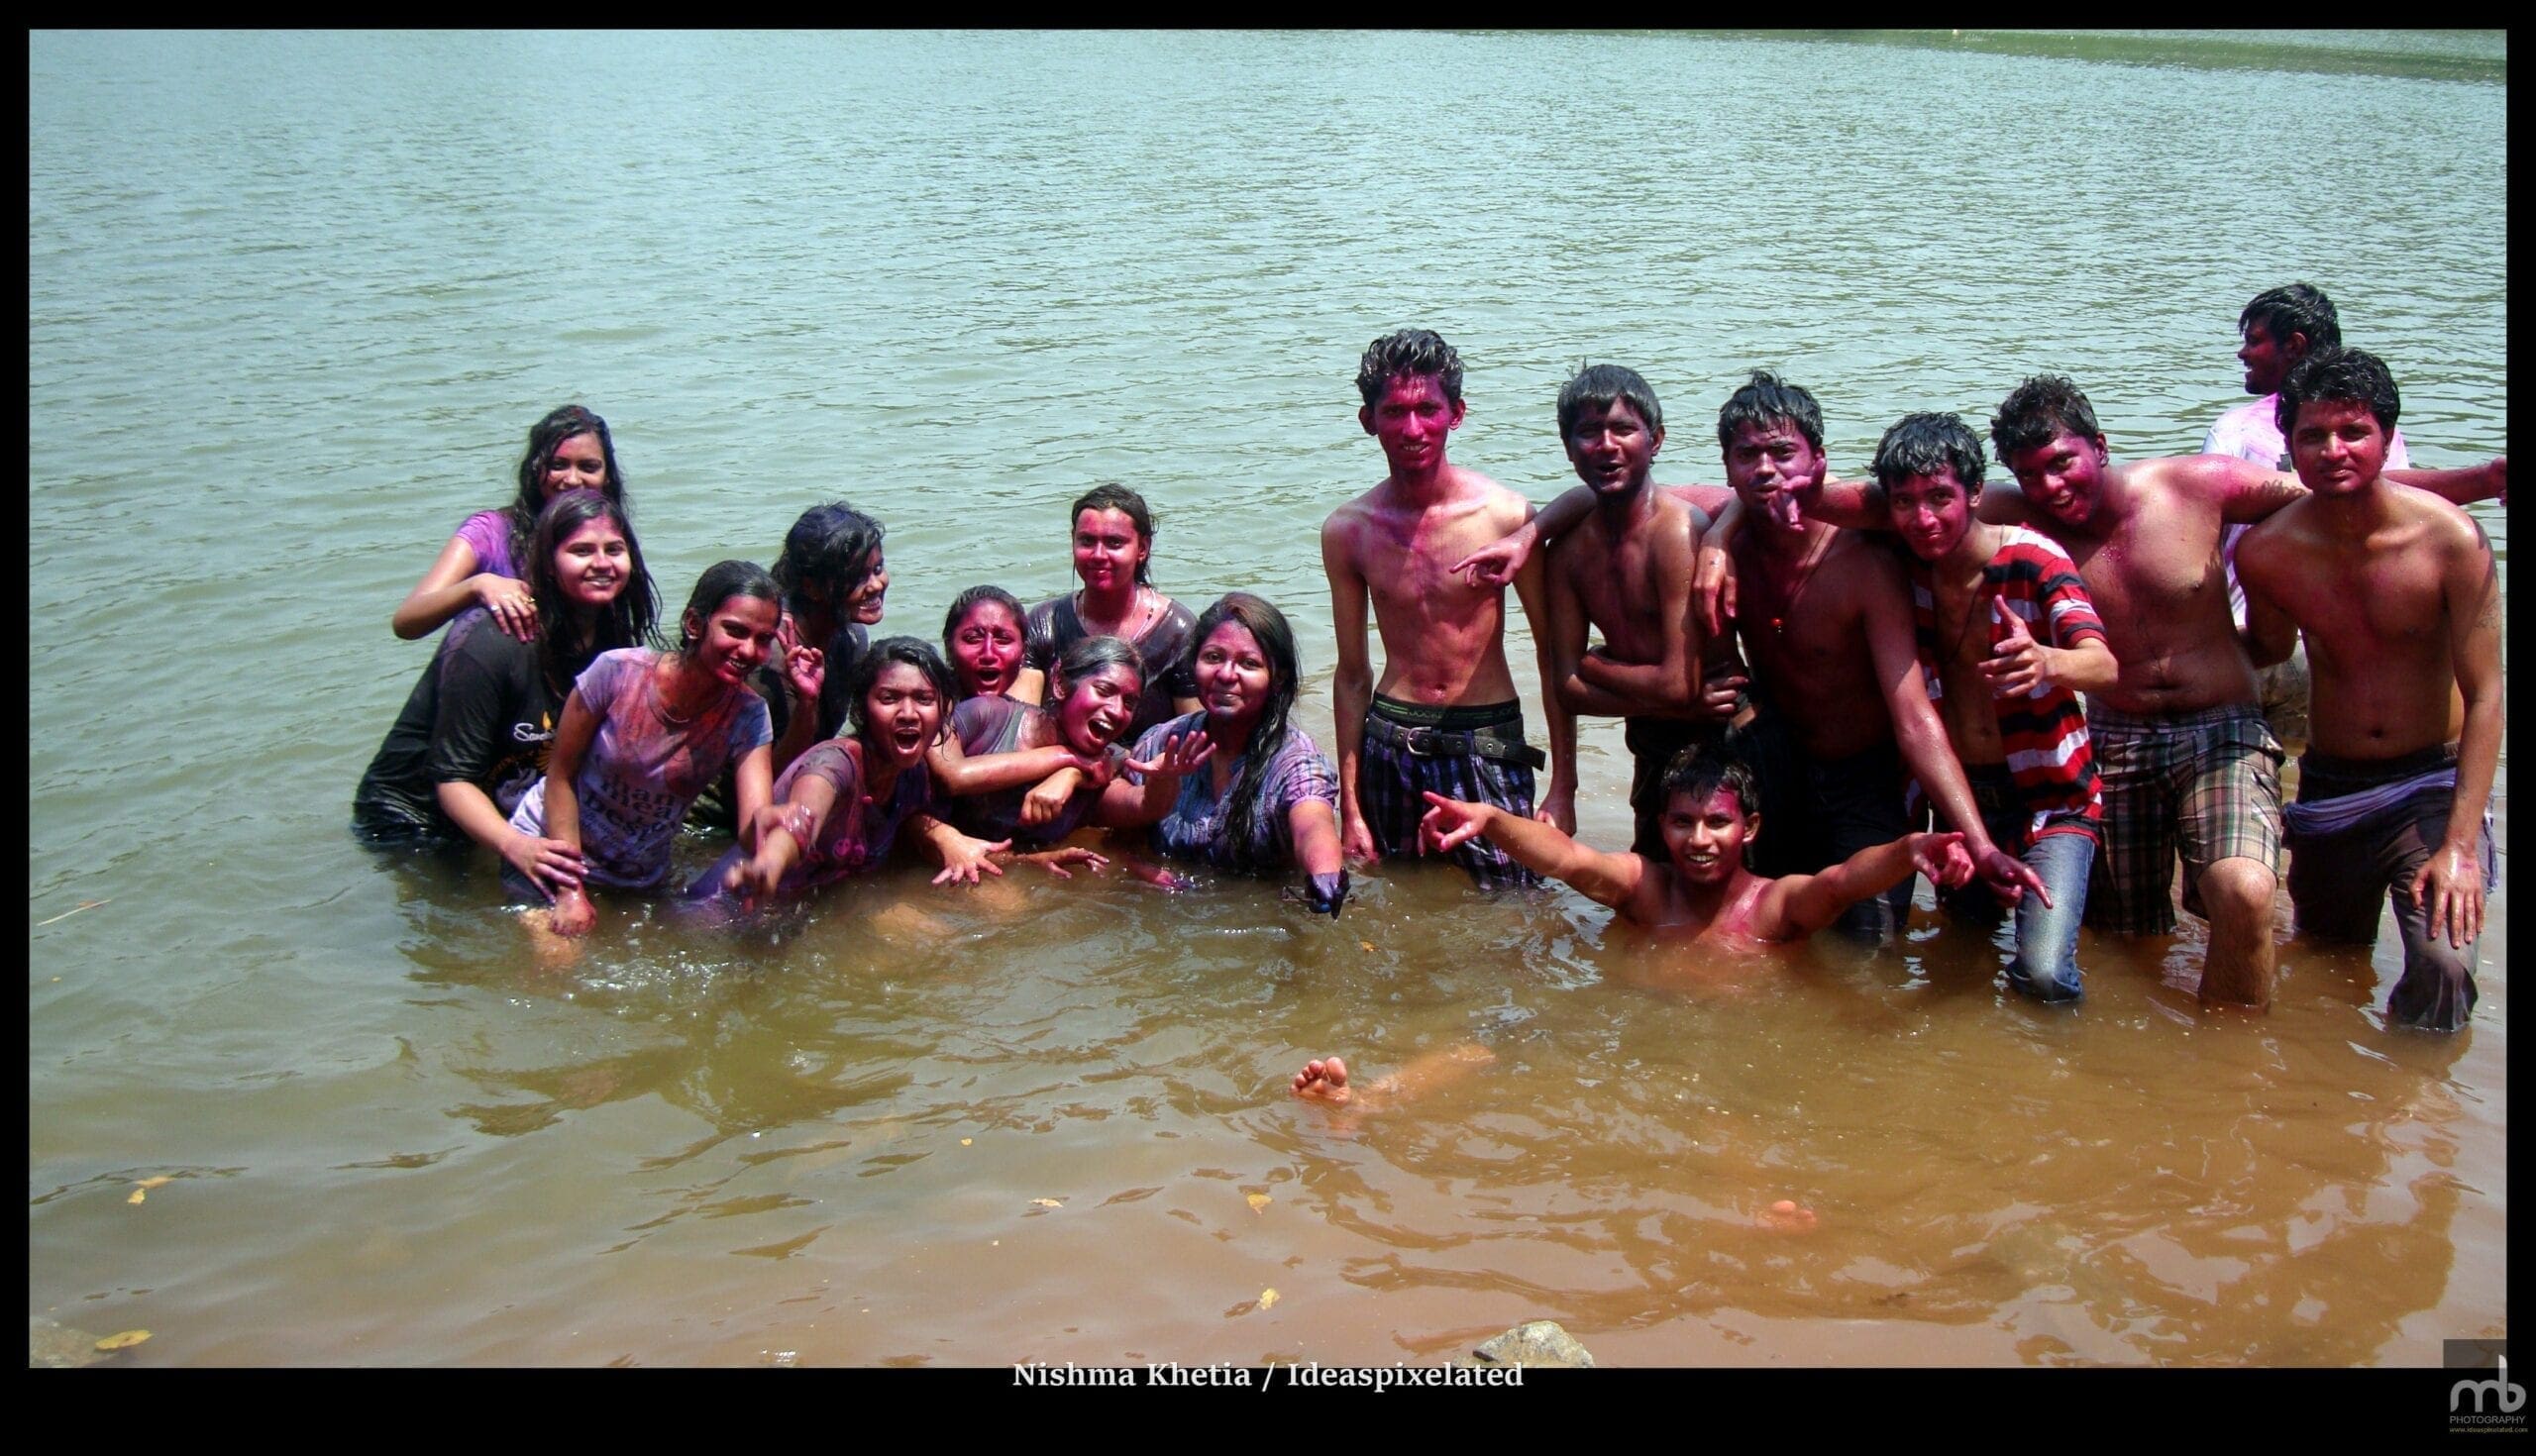 Holi in Manipal at the River Swarna